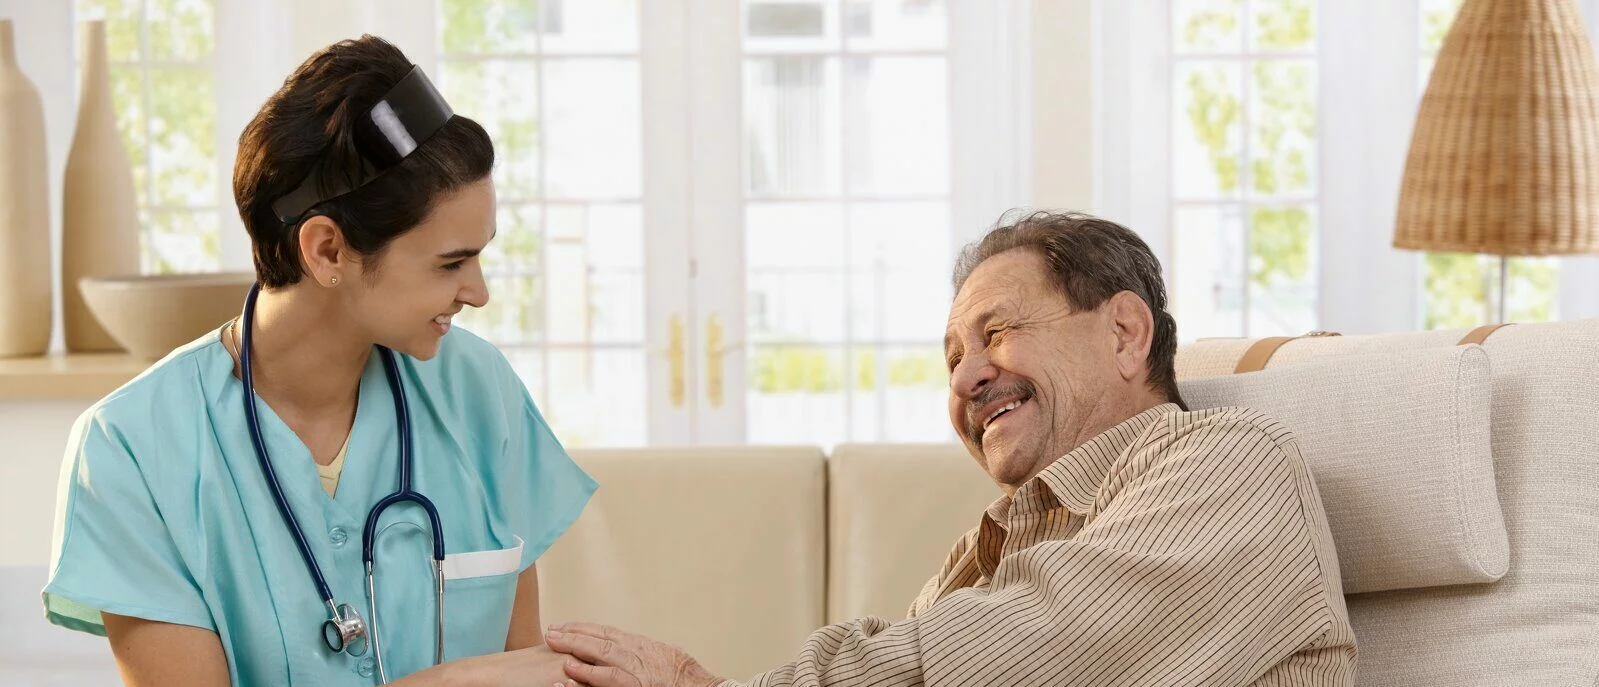 Happy nurse holding hands of elderly patient sitting side by side at home, laughing. 2022/03/AdobeStock_24969857-e1647892175946.jpeg 